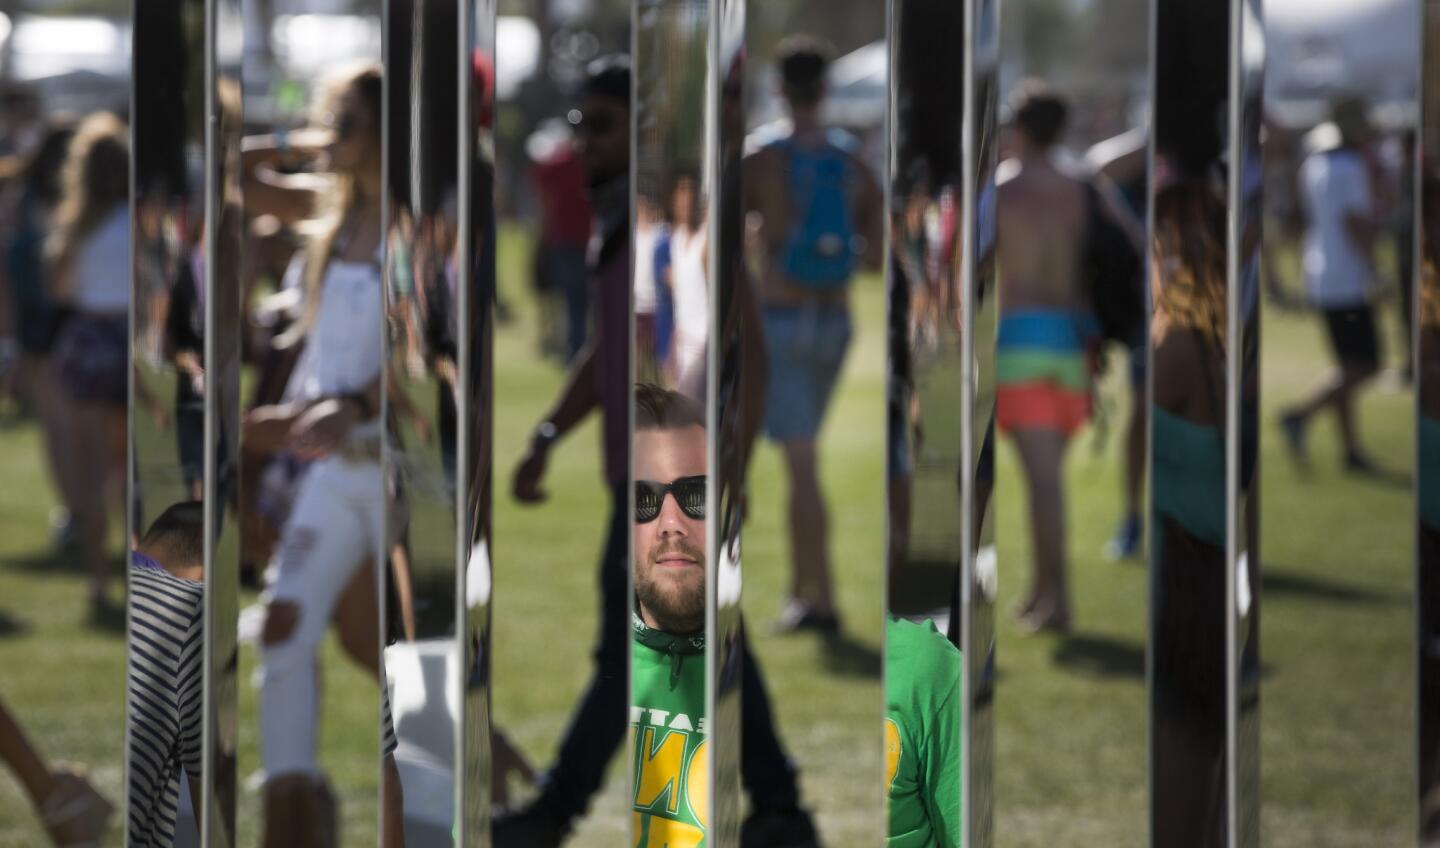 Day One: Coachella Valley Music and Arts Festival